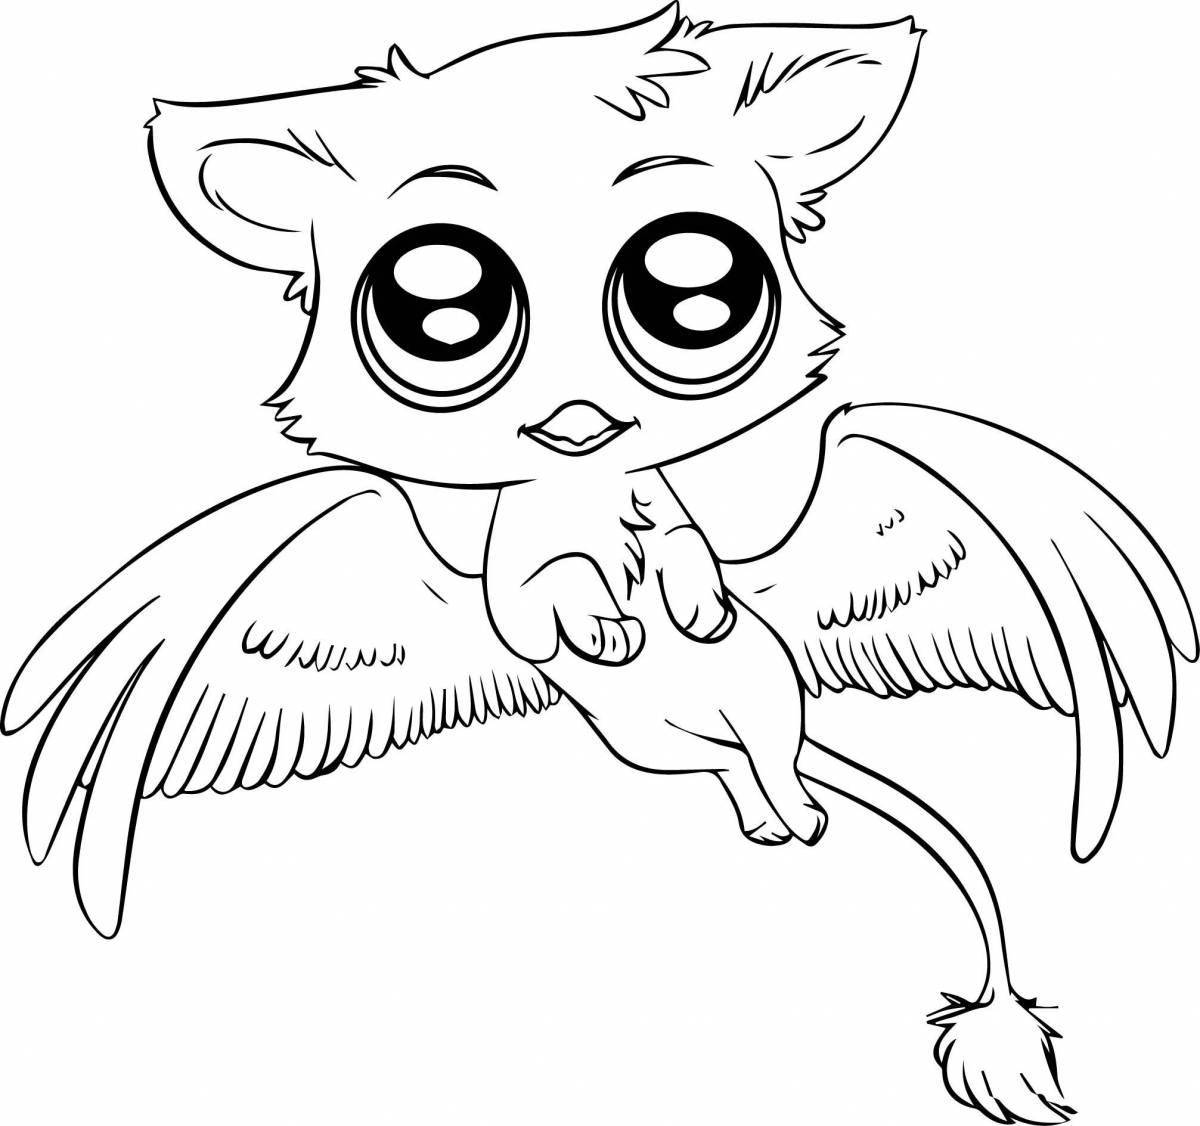 Funny animal coloring pages